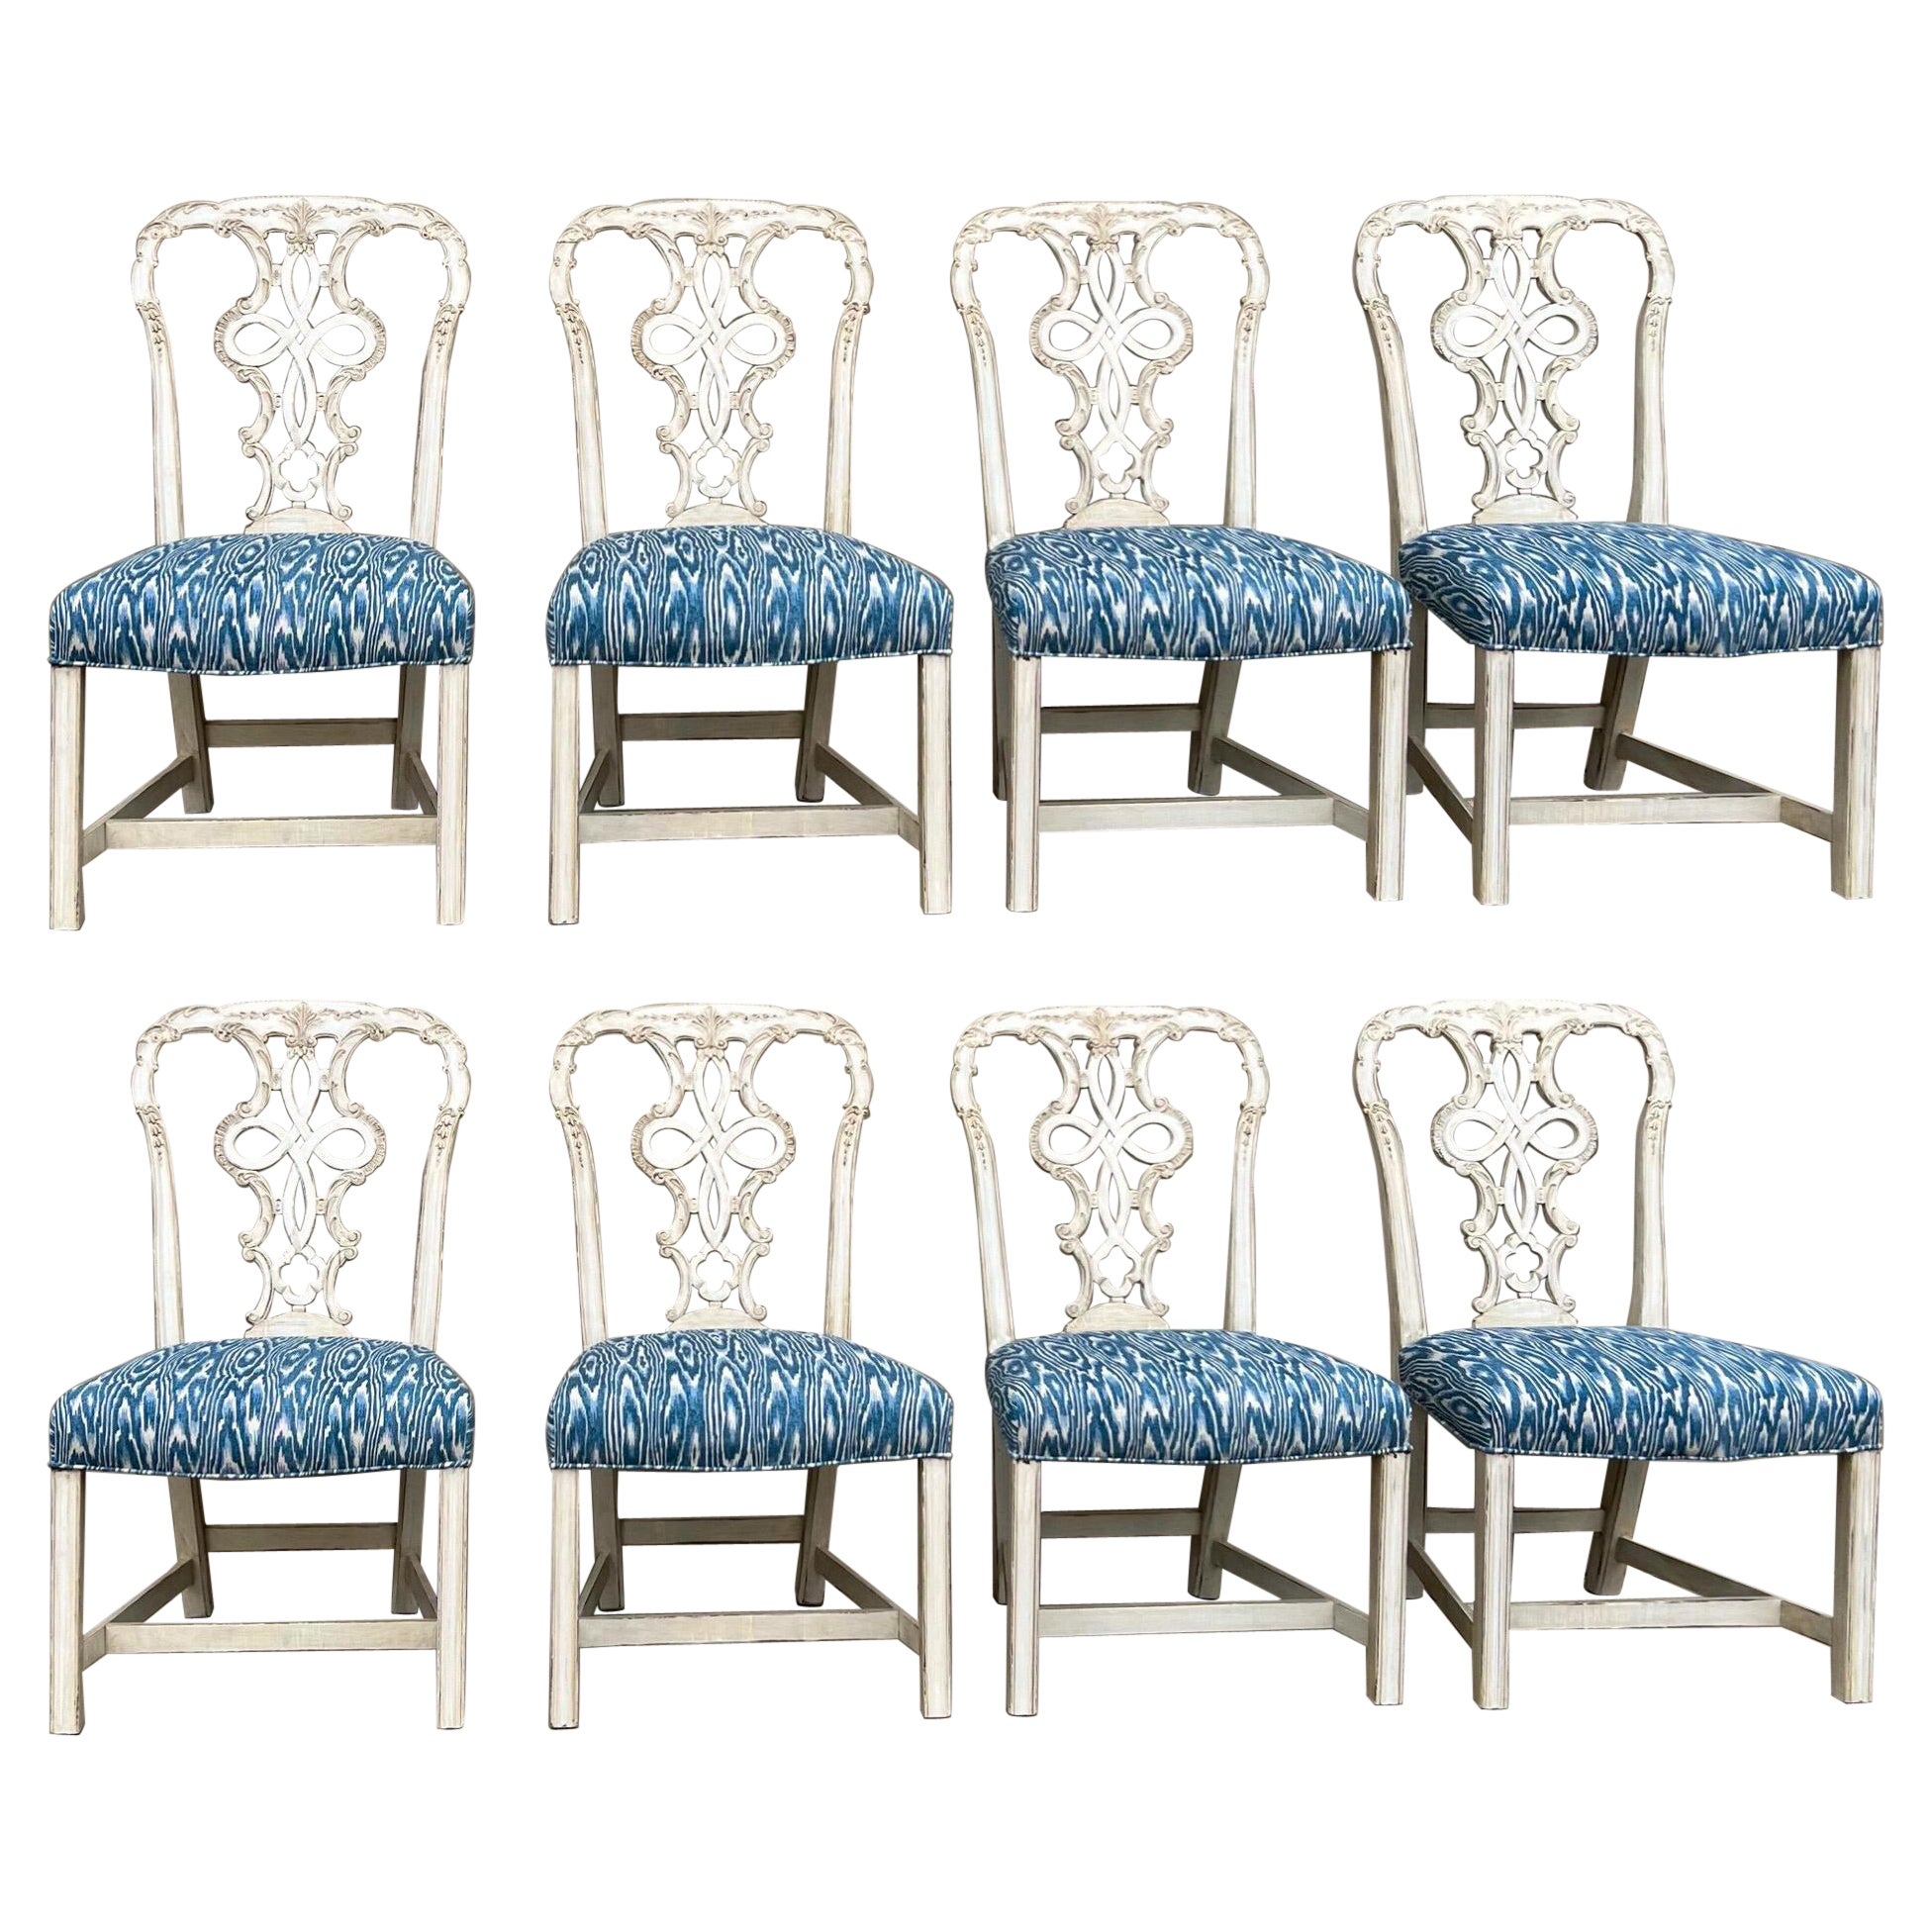 Just in time for the holidays! These lovely dining chairs are perfect for the large round dining table. The set has been completely re-done. The mahogany frame has been updated with a hand painted antique white finish. The blue and white faux bois